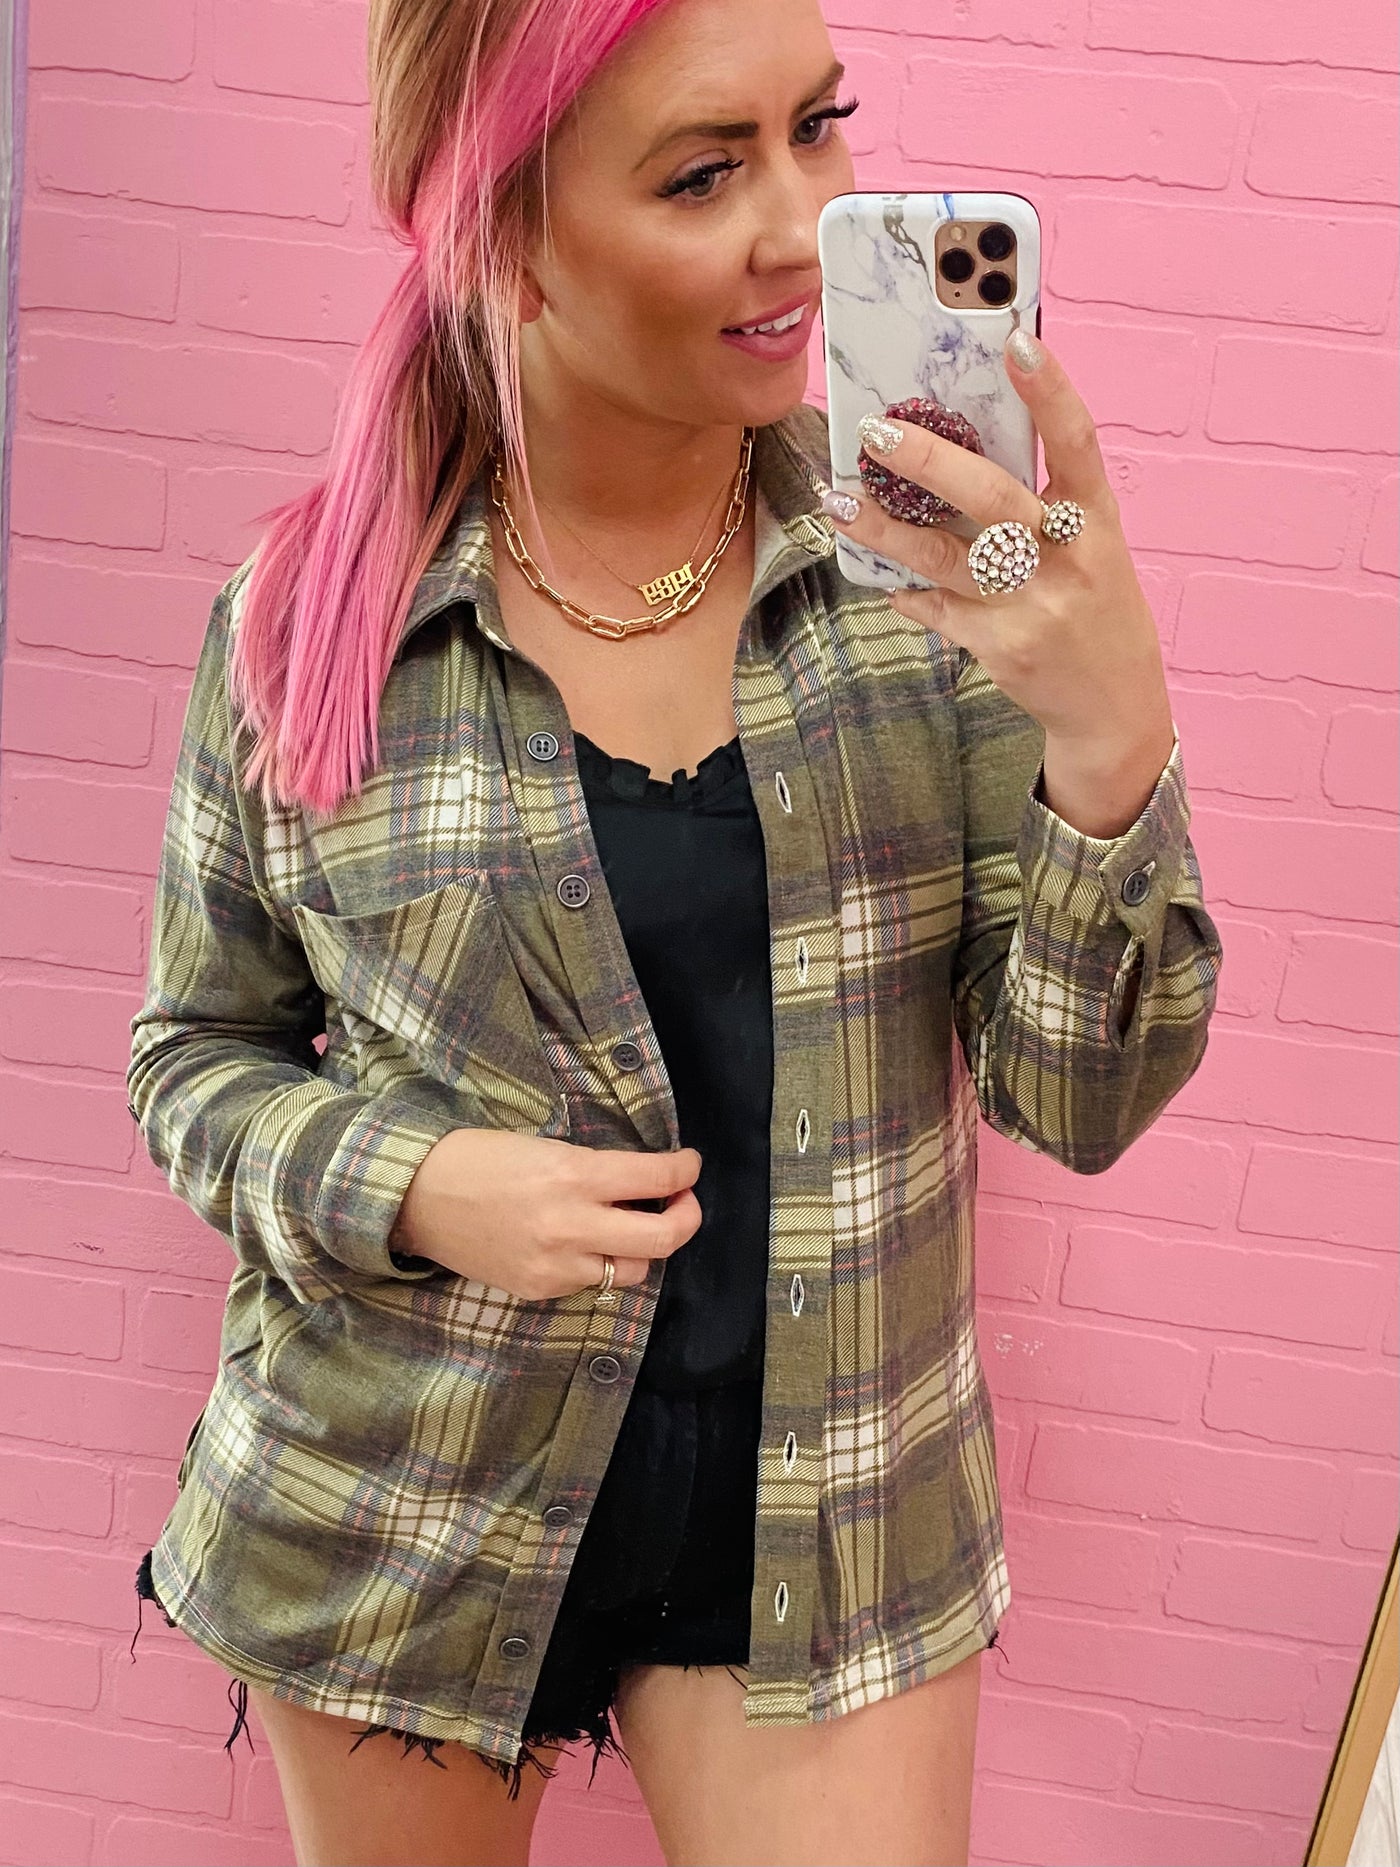 The Evelyn Plaid Top